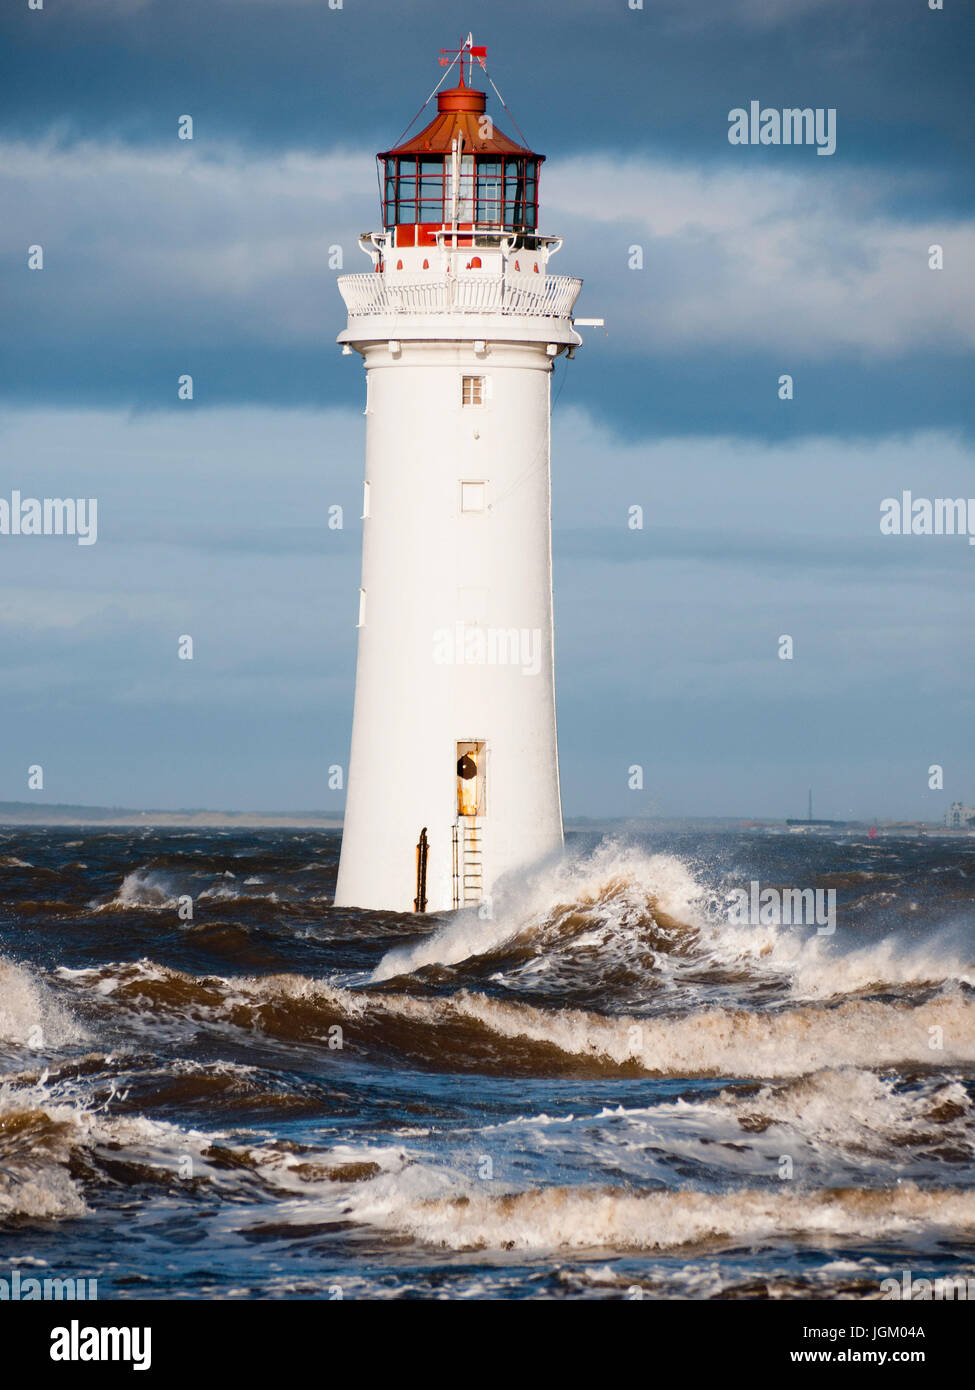 New Brighton lighthouse, in the River Mersey, opened in 1830, in stormy seas. Stock Photo